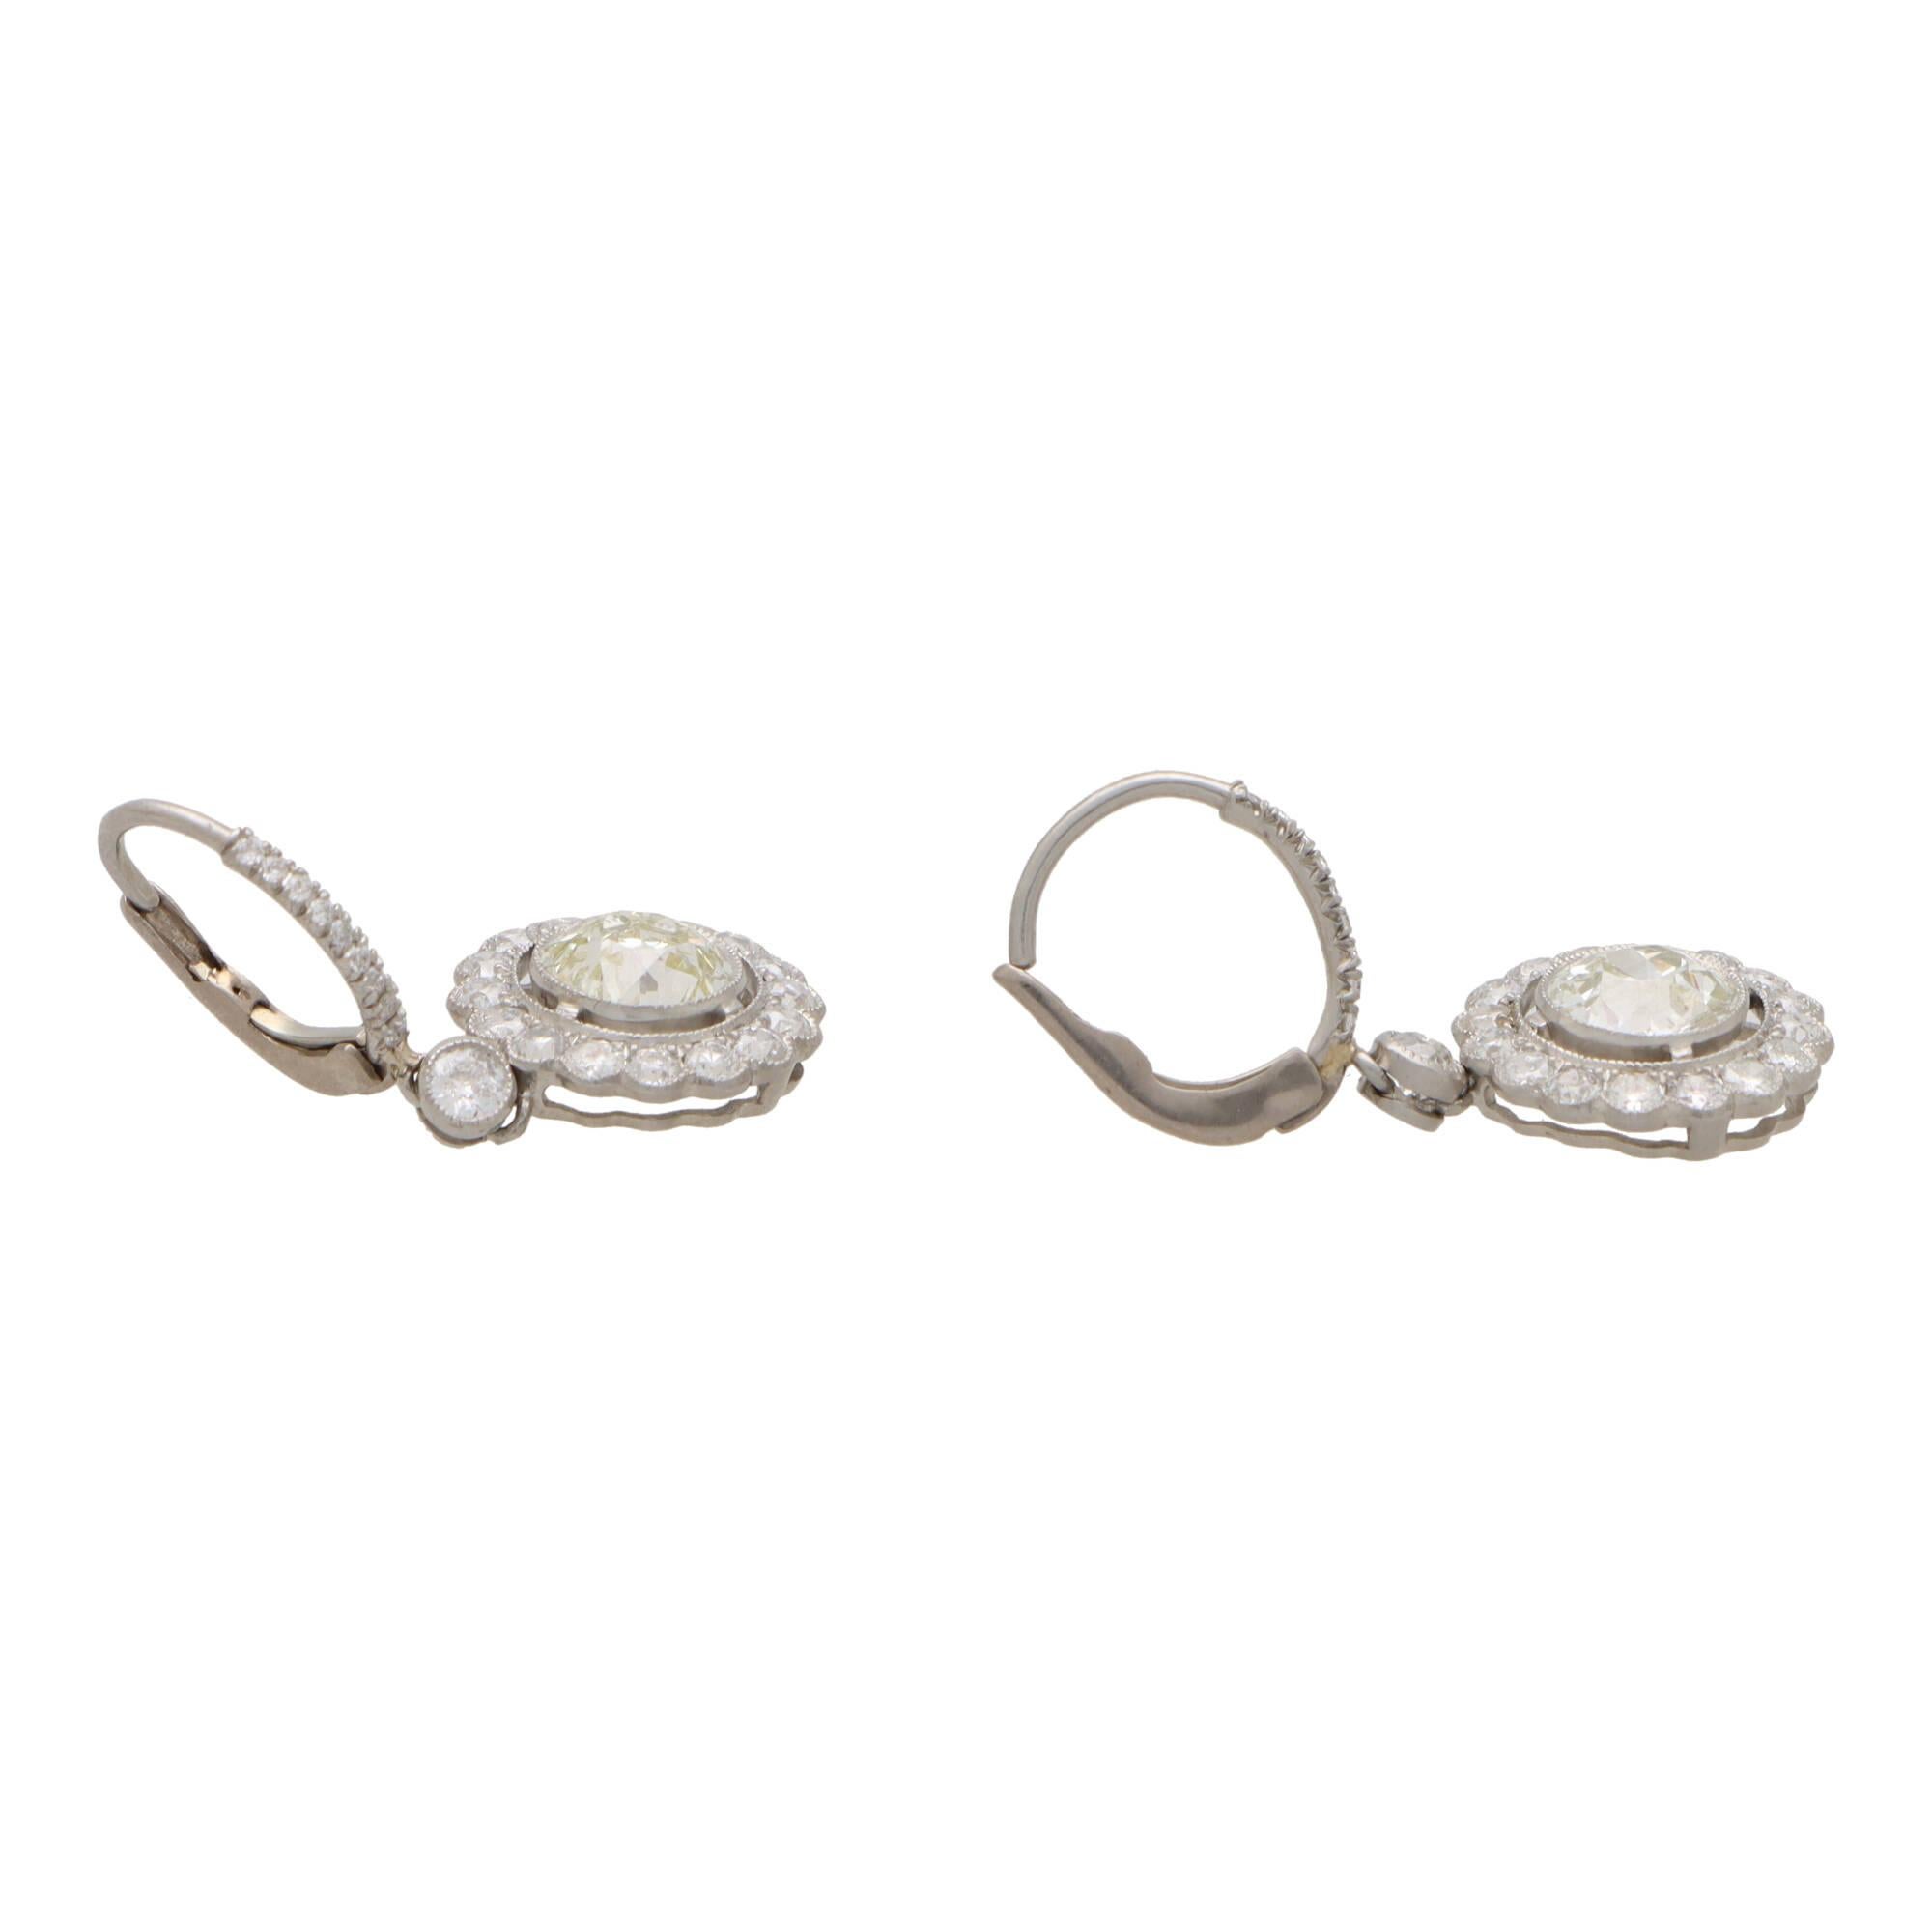 A beautiful pair of vintage inspired round diamond cluster drop earrings set in platinum.

Each earring is composed of a single 1.25 carat old  European cut central diamond which is rubover set with a milled edge to the centre of a halo of  smaller